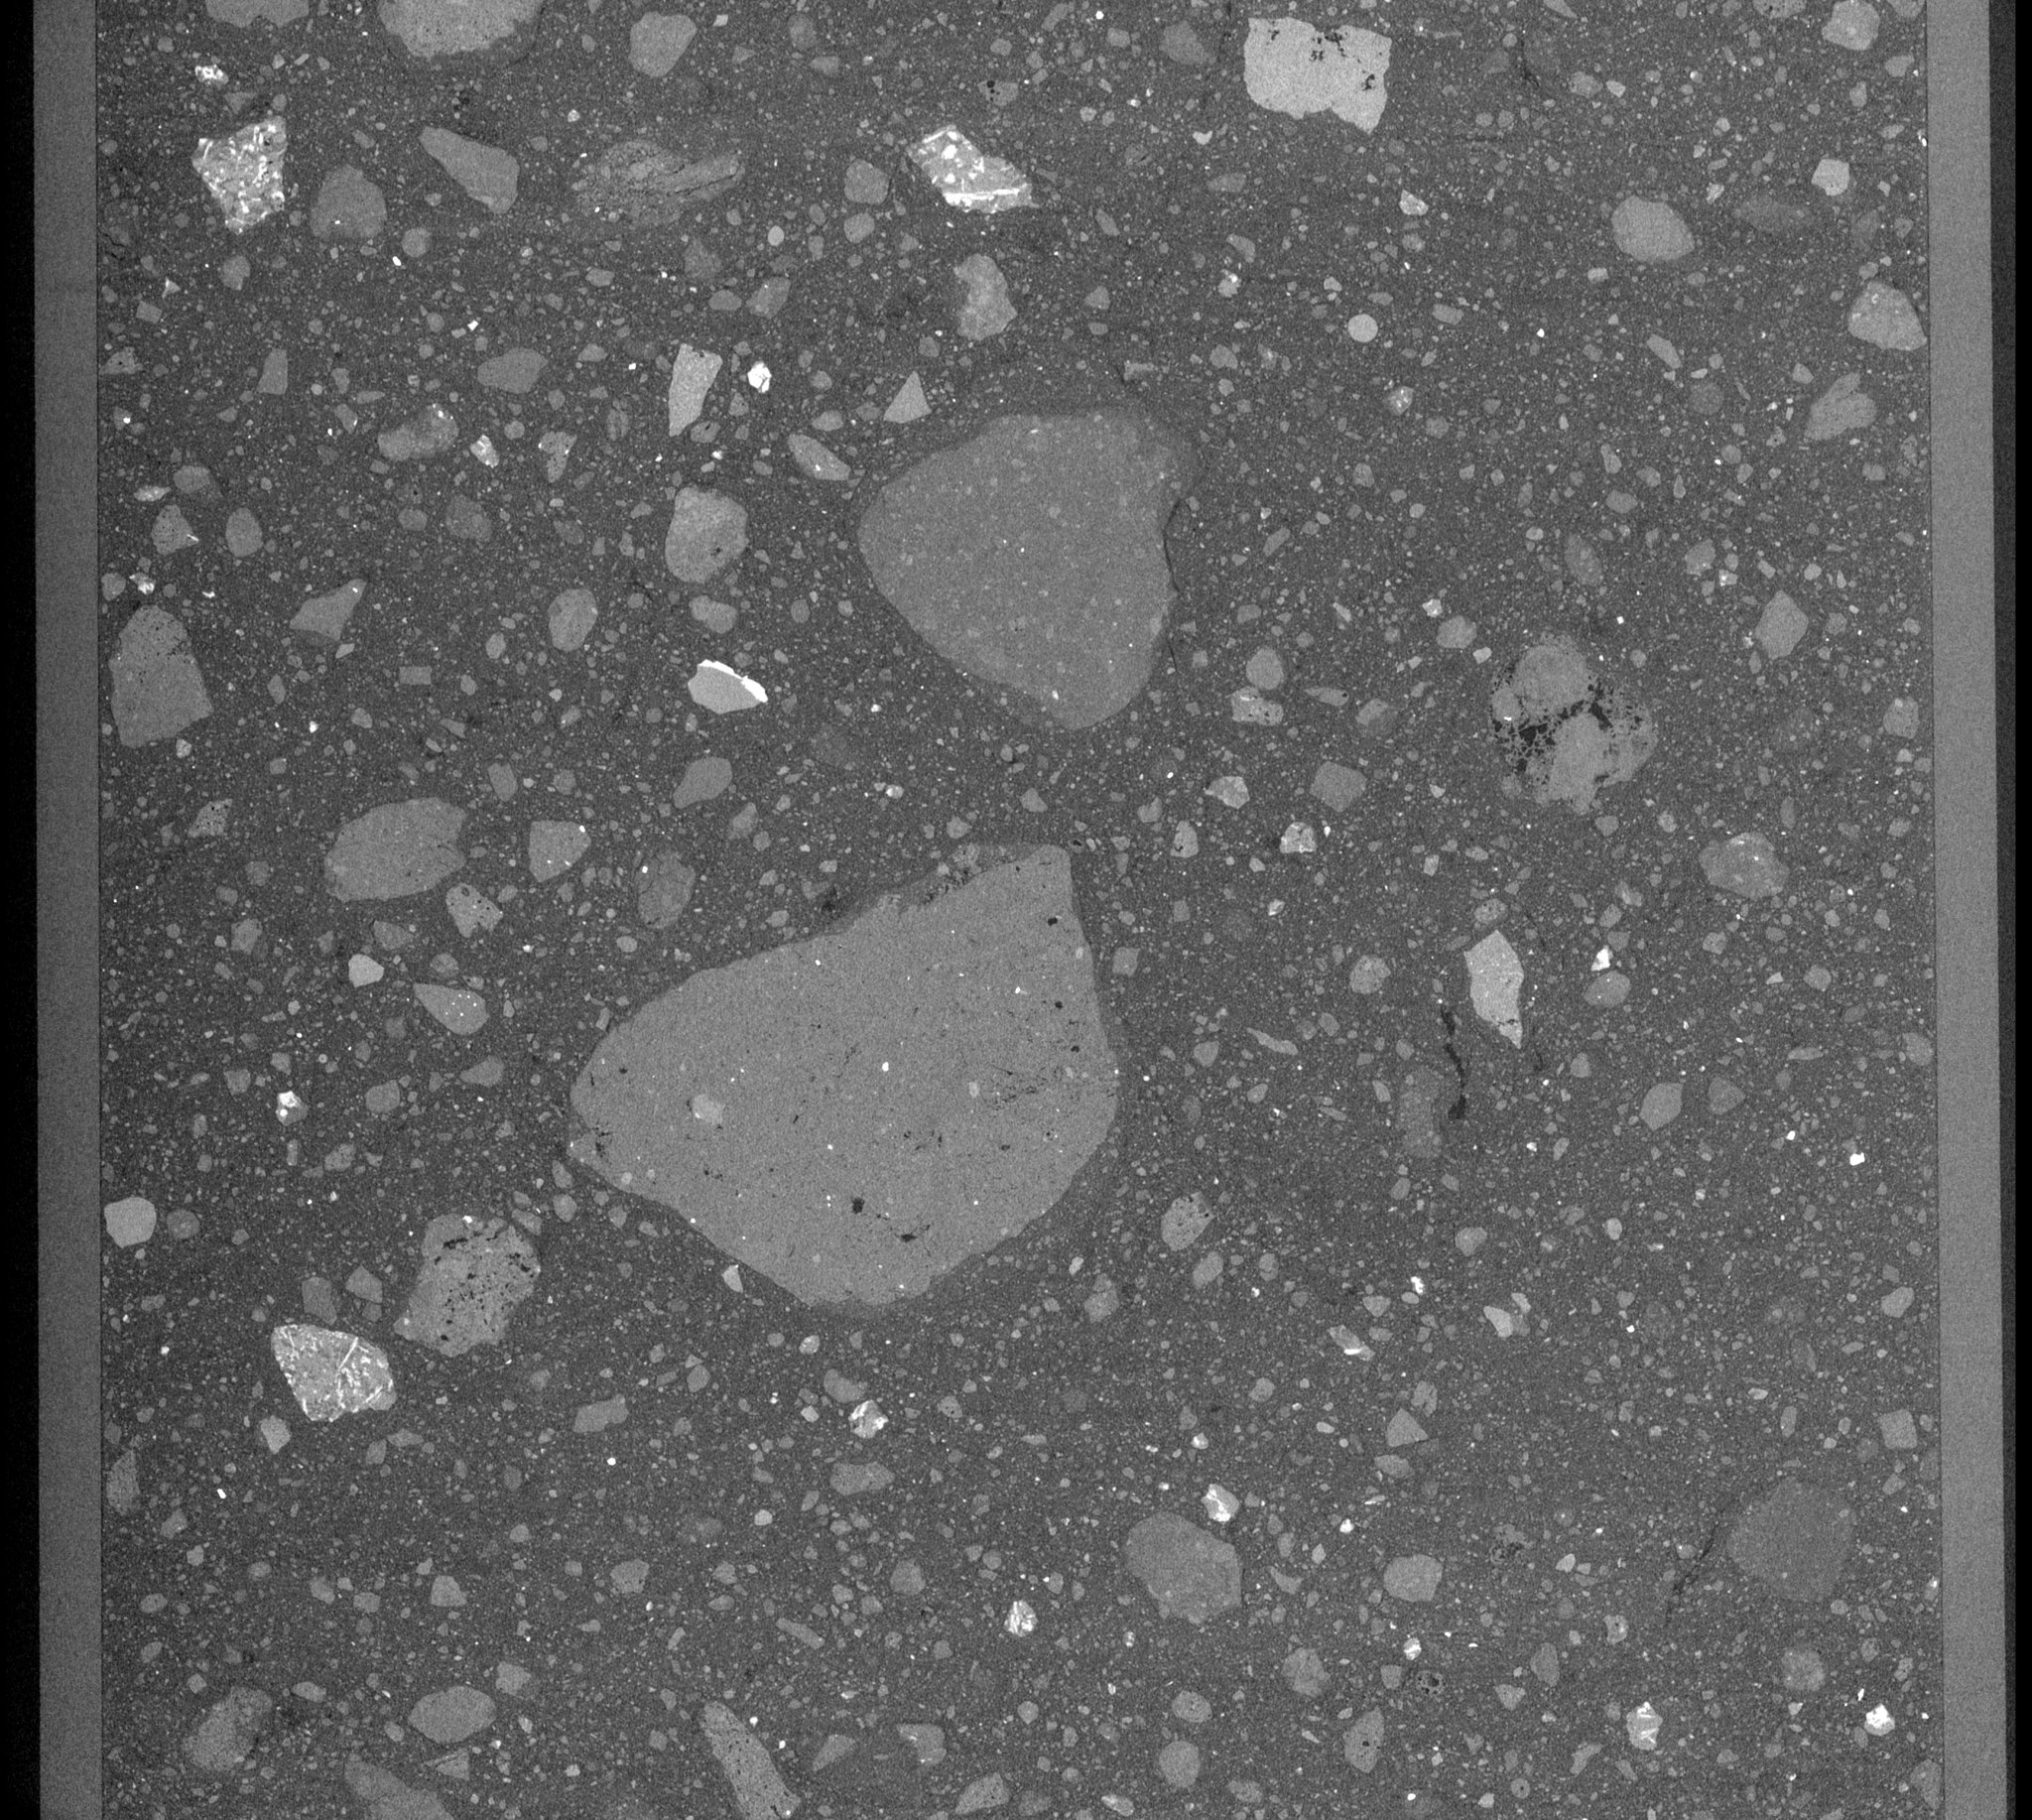 An x-ray computed tomography image of Apollo 17 core sample 73001 taken at the University of Texas at Austin, a member of the Apollo Next Generation Sample Analysis team. 